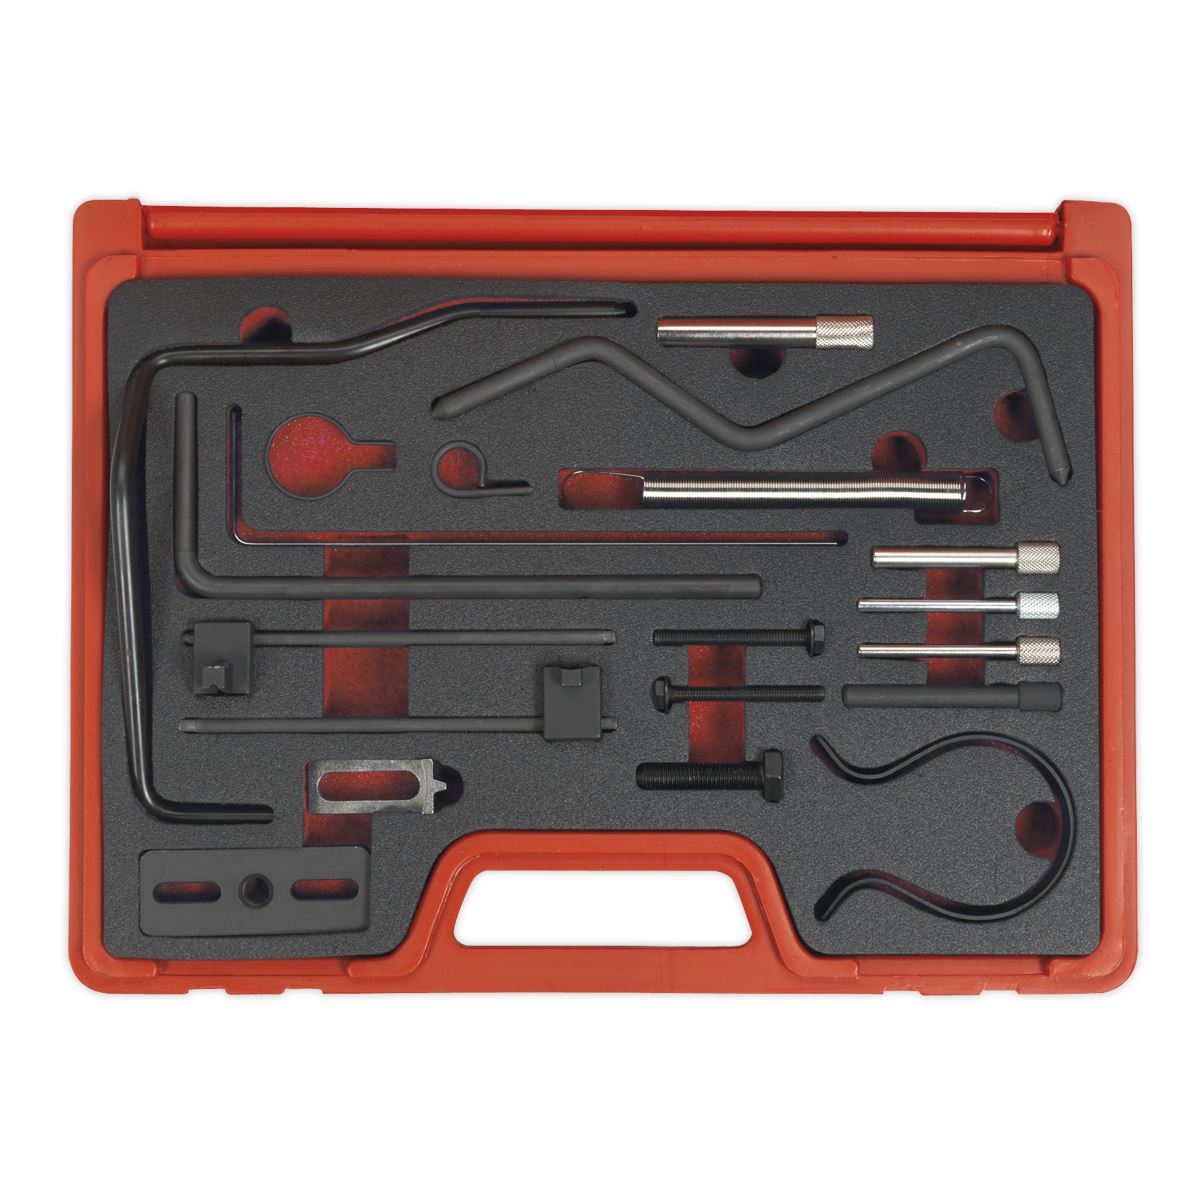 Sealey Diesel Engine Timing Tool Kit - for PSA, Ford - Belt Drive